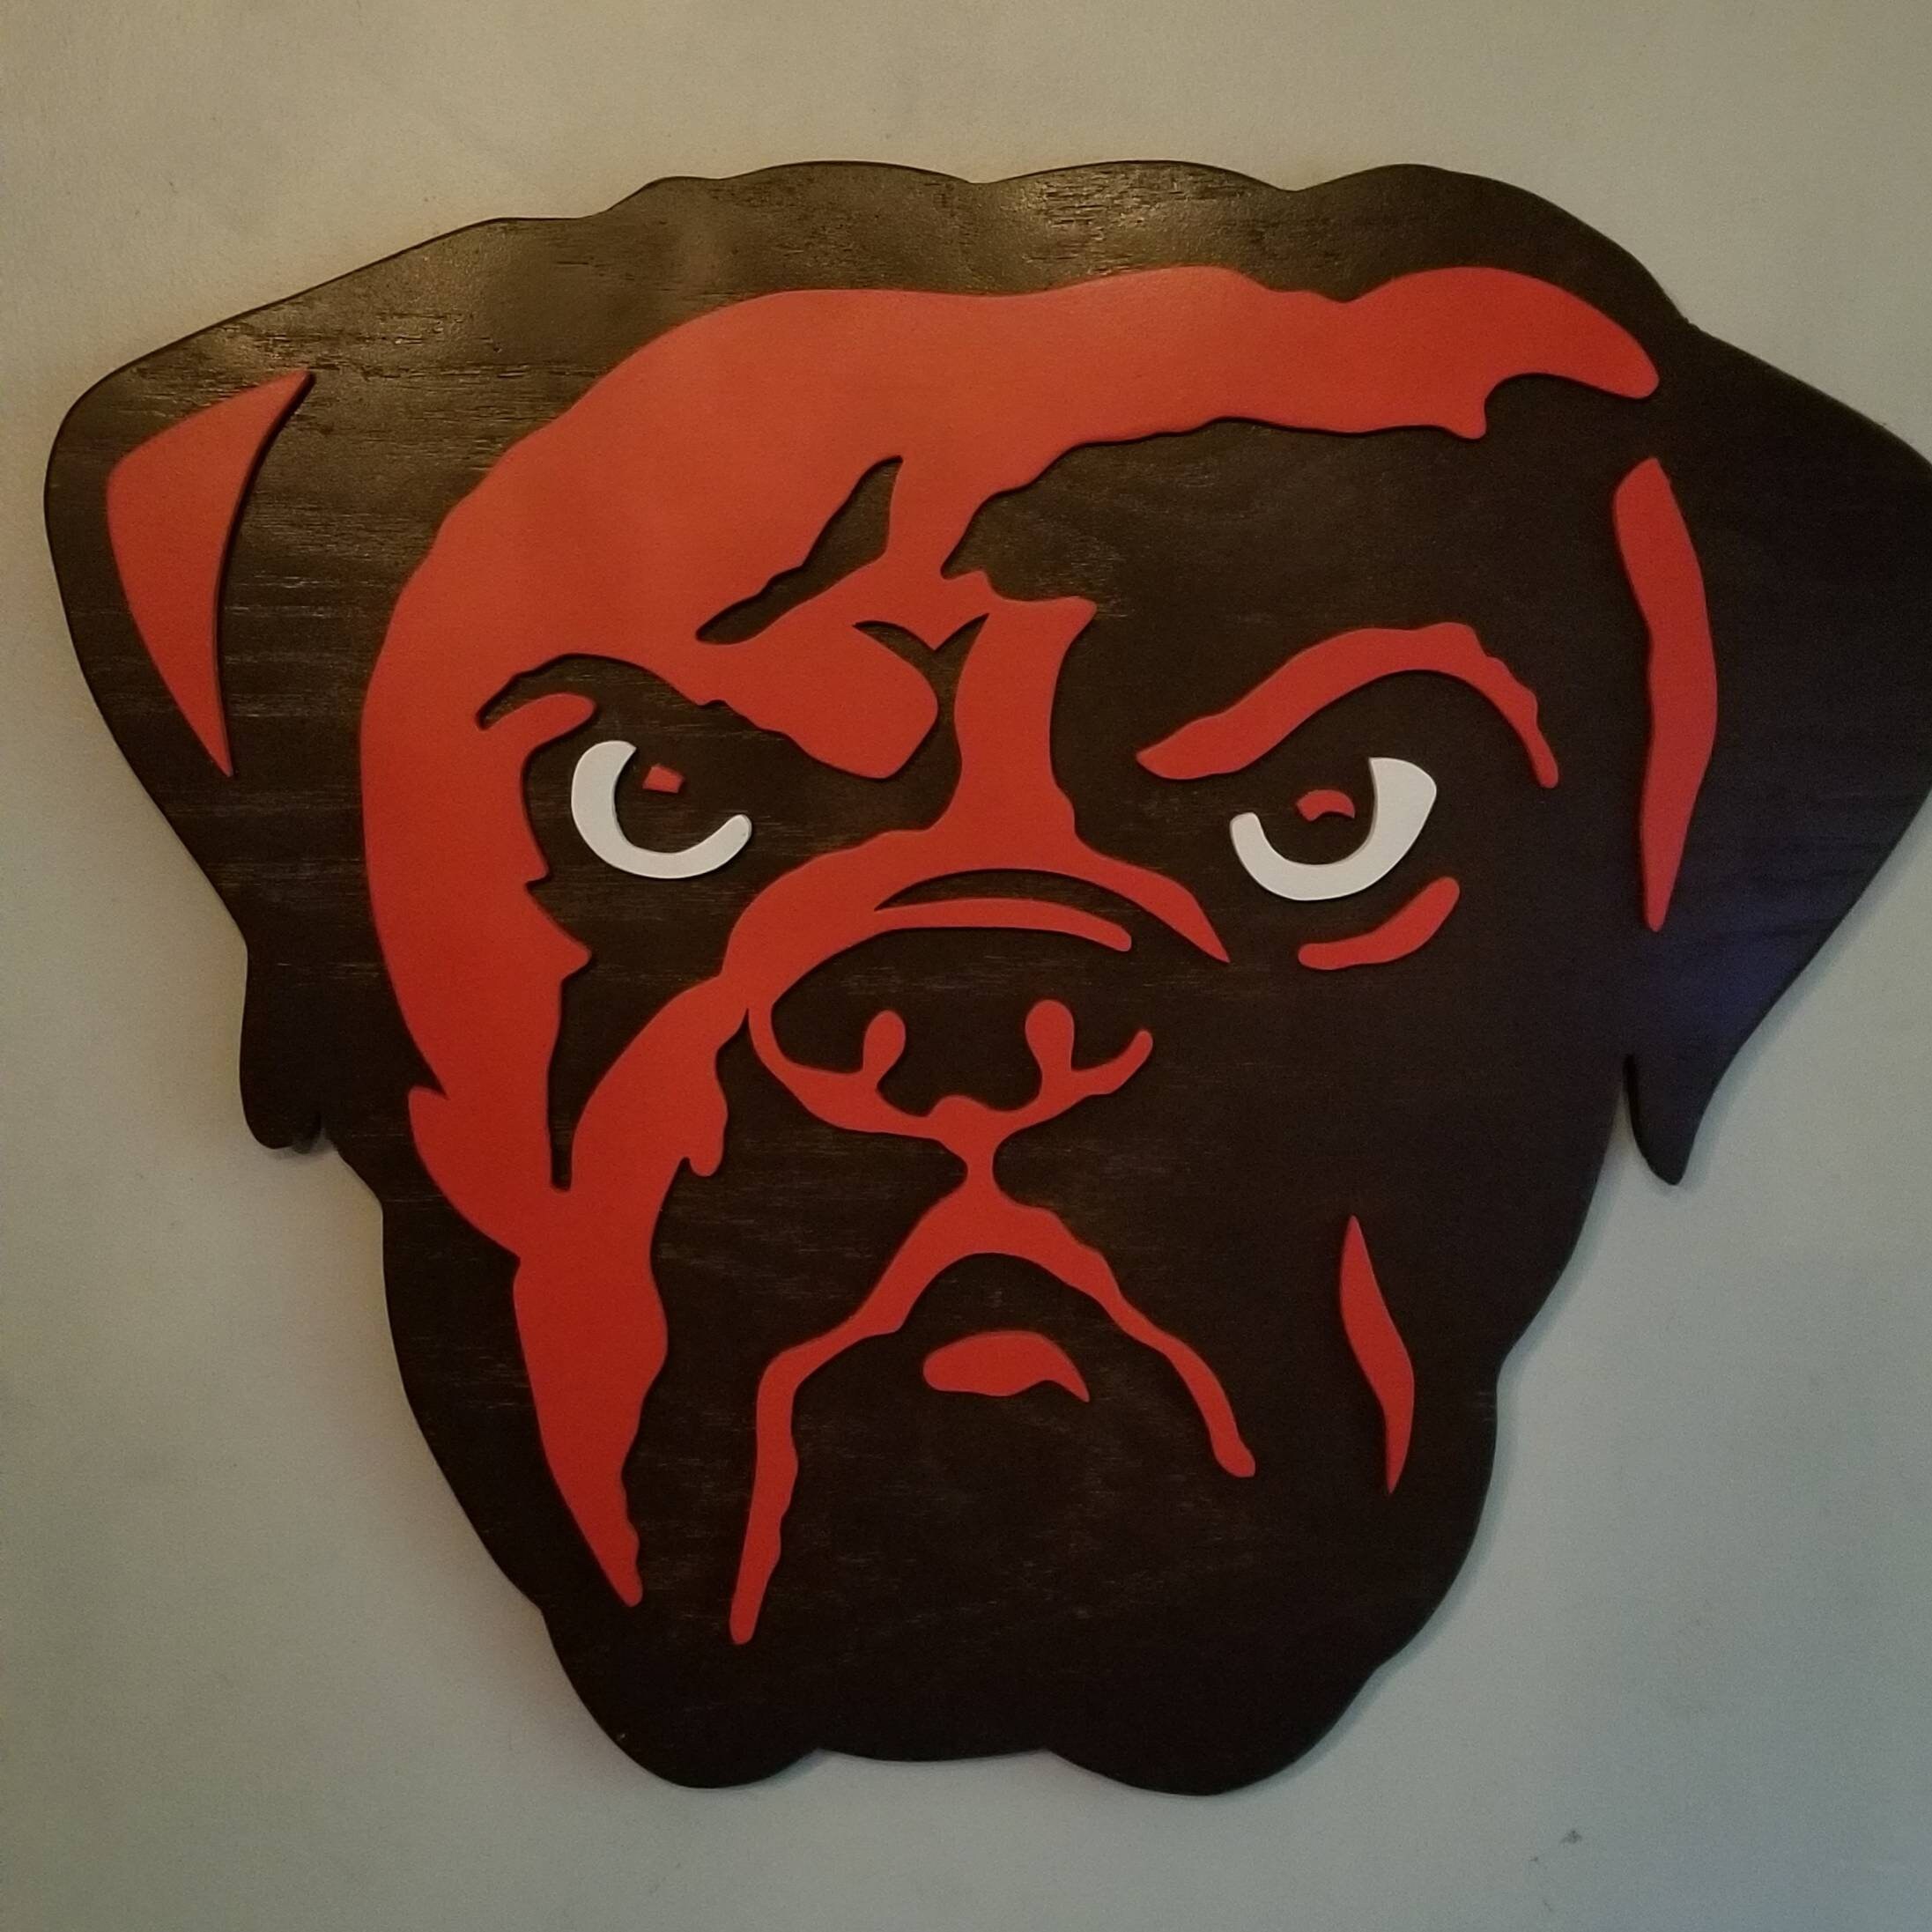 Browns Dawg Pound Logo Based on Snoring, Silly Bulldog